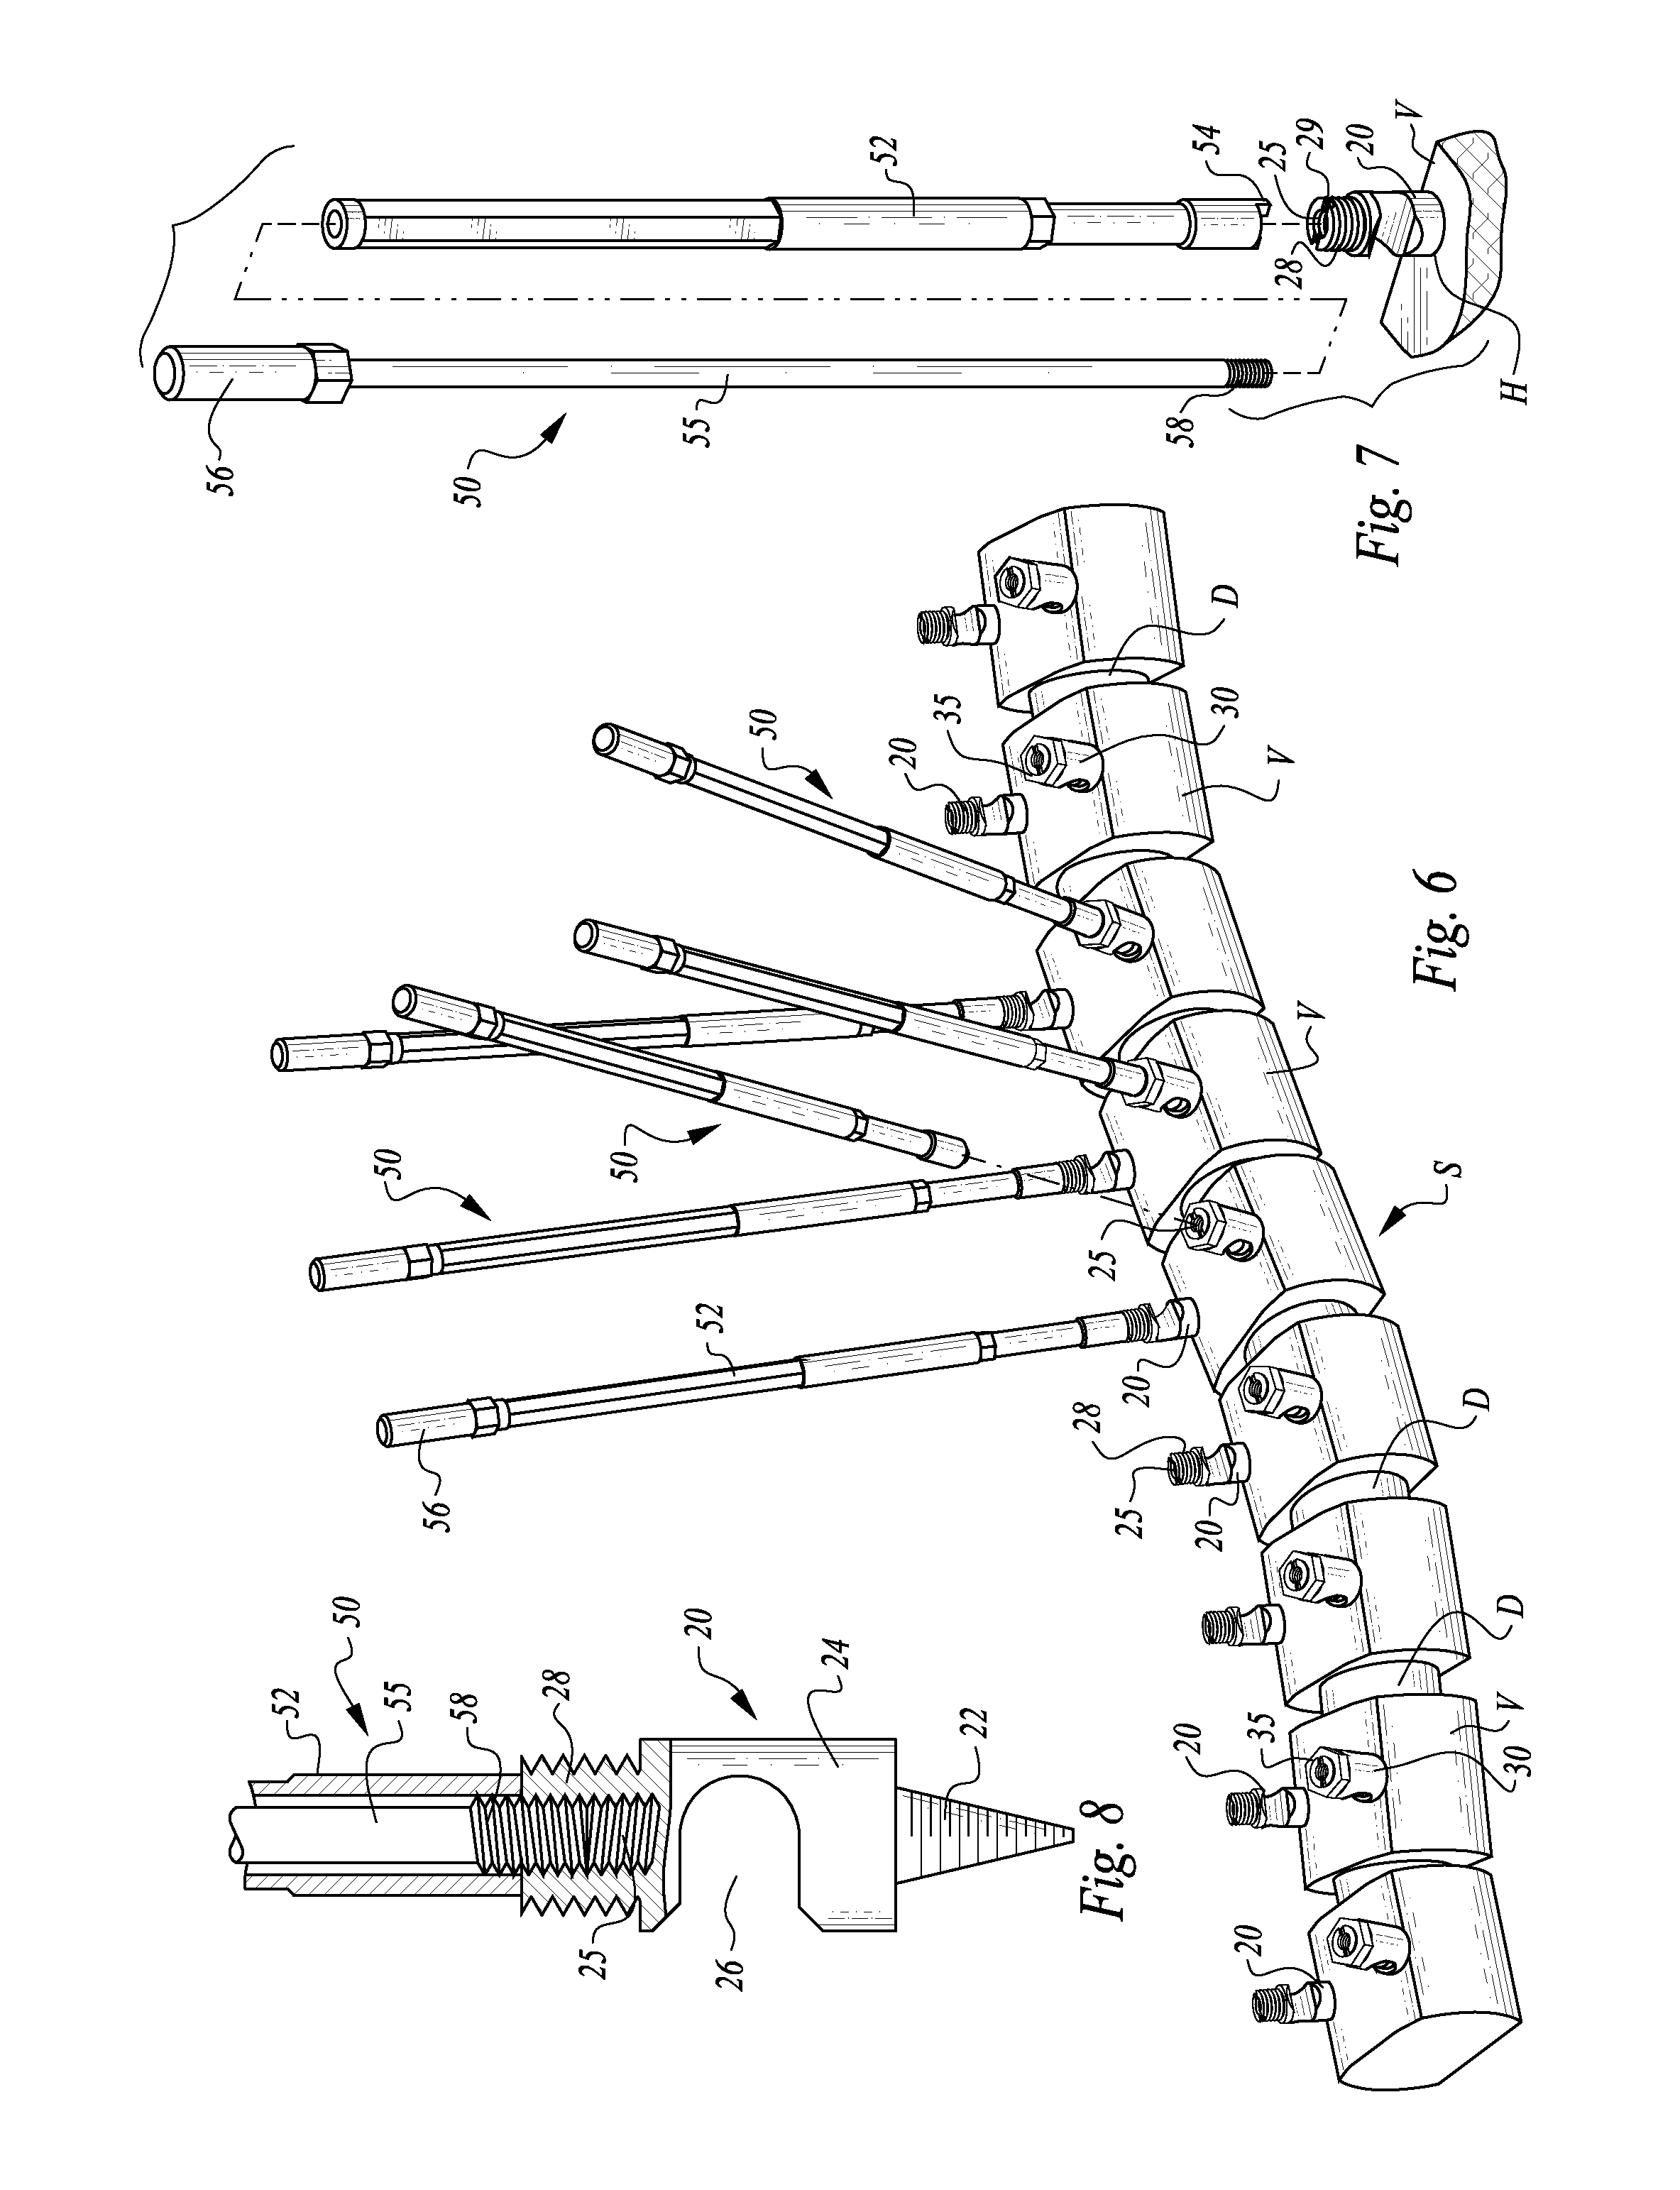 Table anchored scoliosis de-rotation system and method